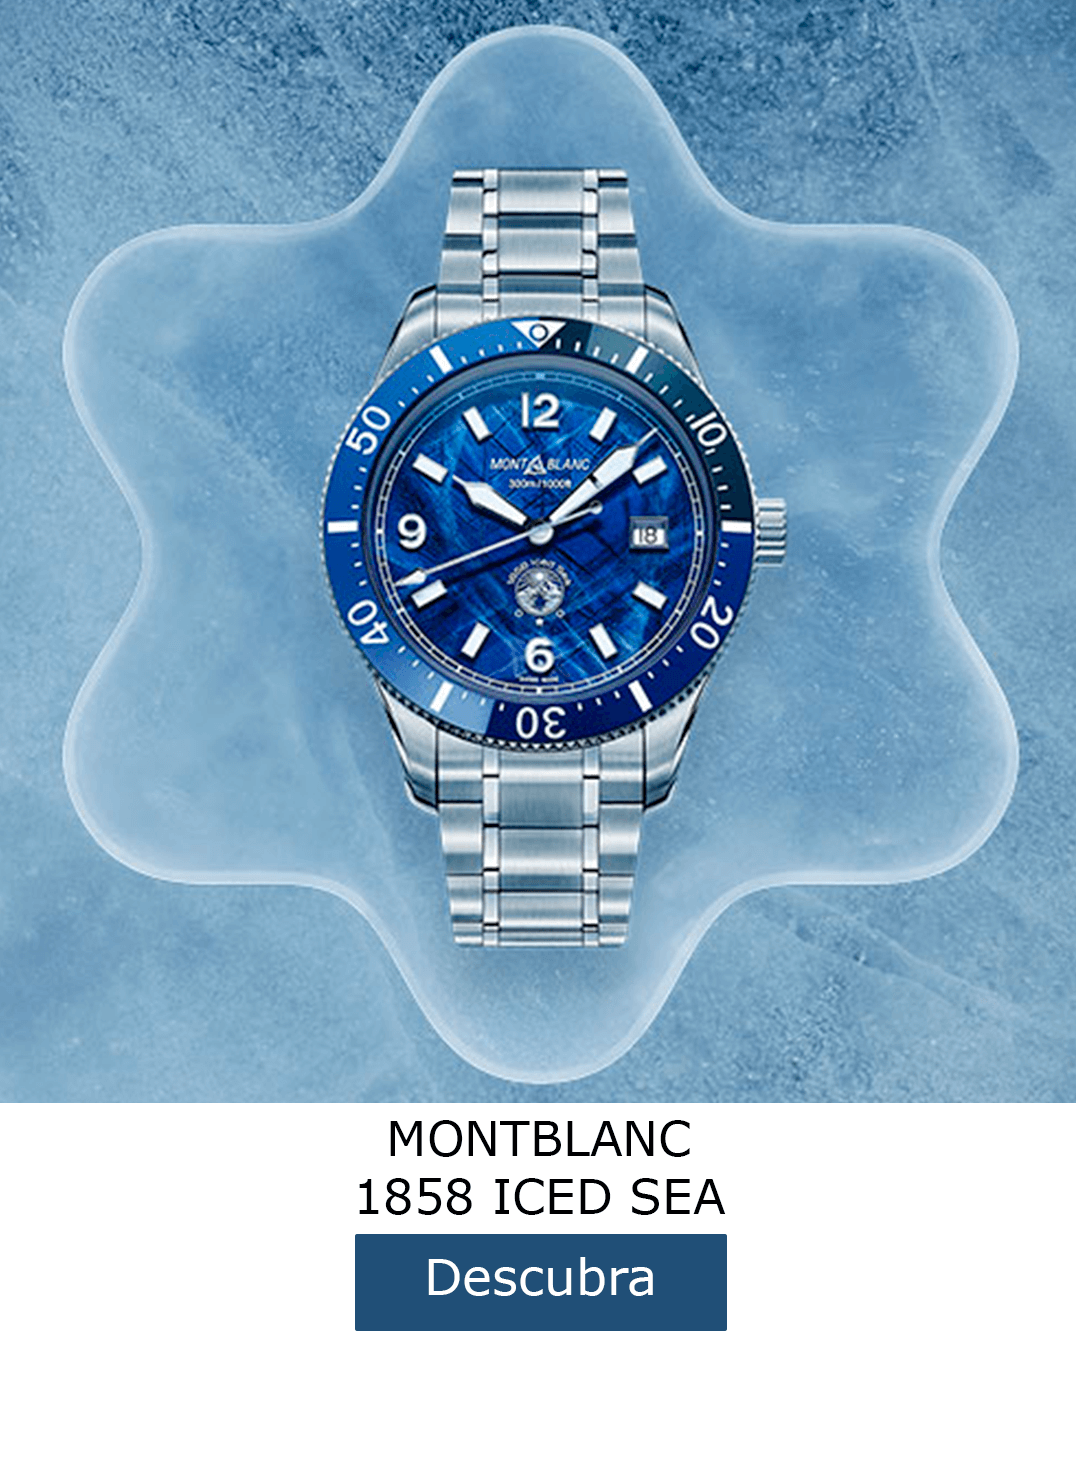 Banner Montblanc Iced Sea